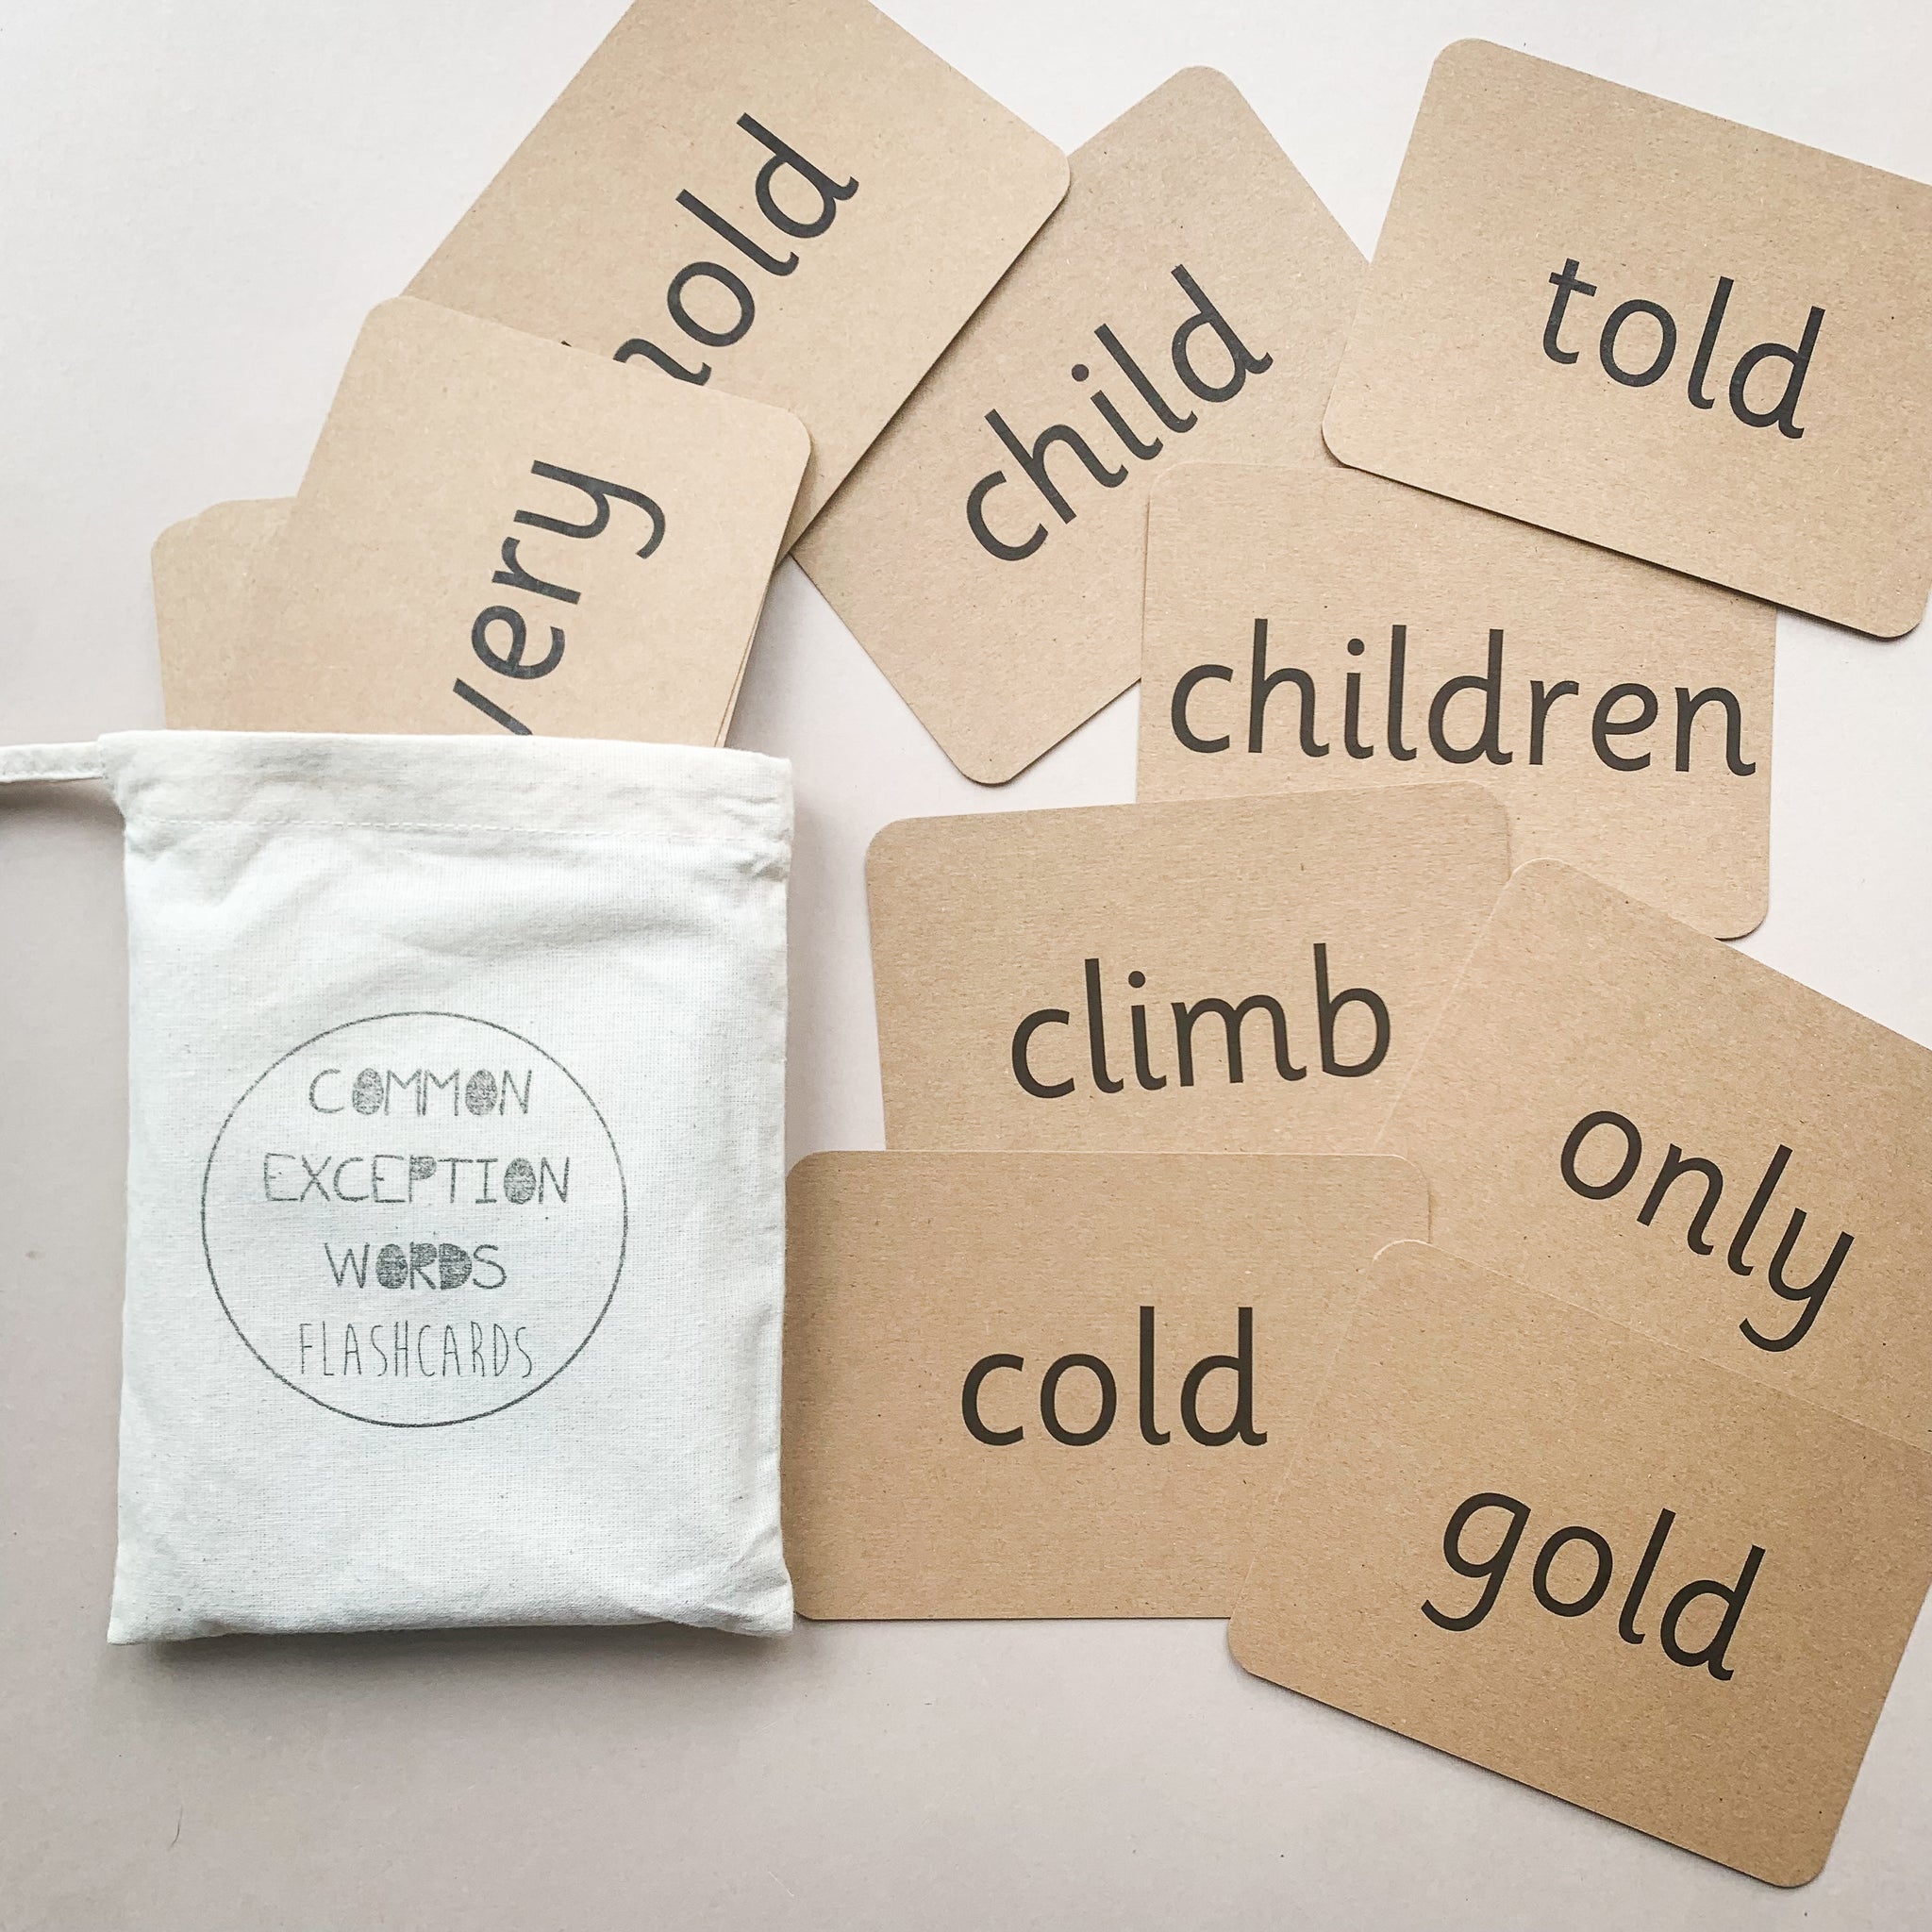 KS1 Common Exception Words Flash Cards - Reception Year 1 & Year 2